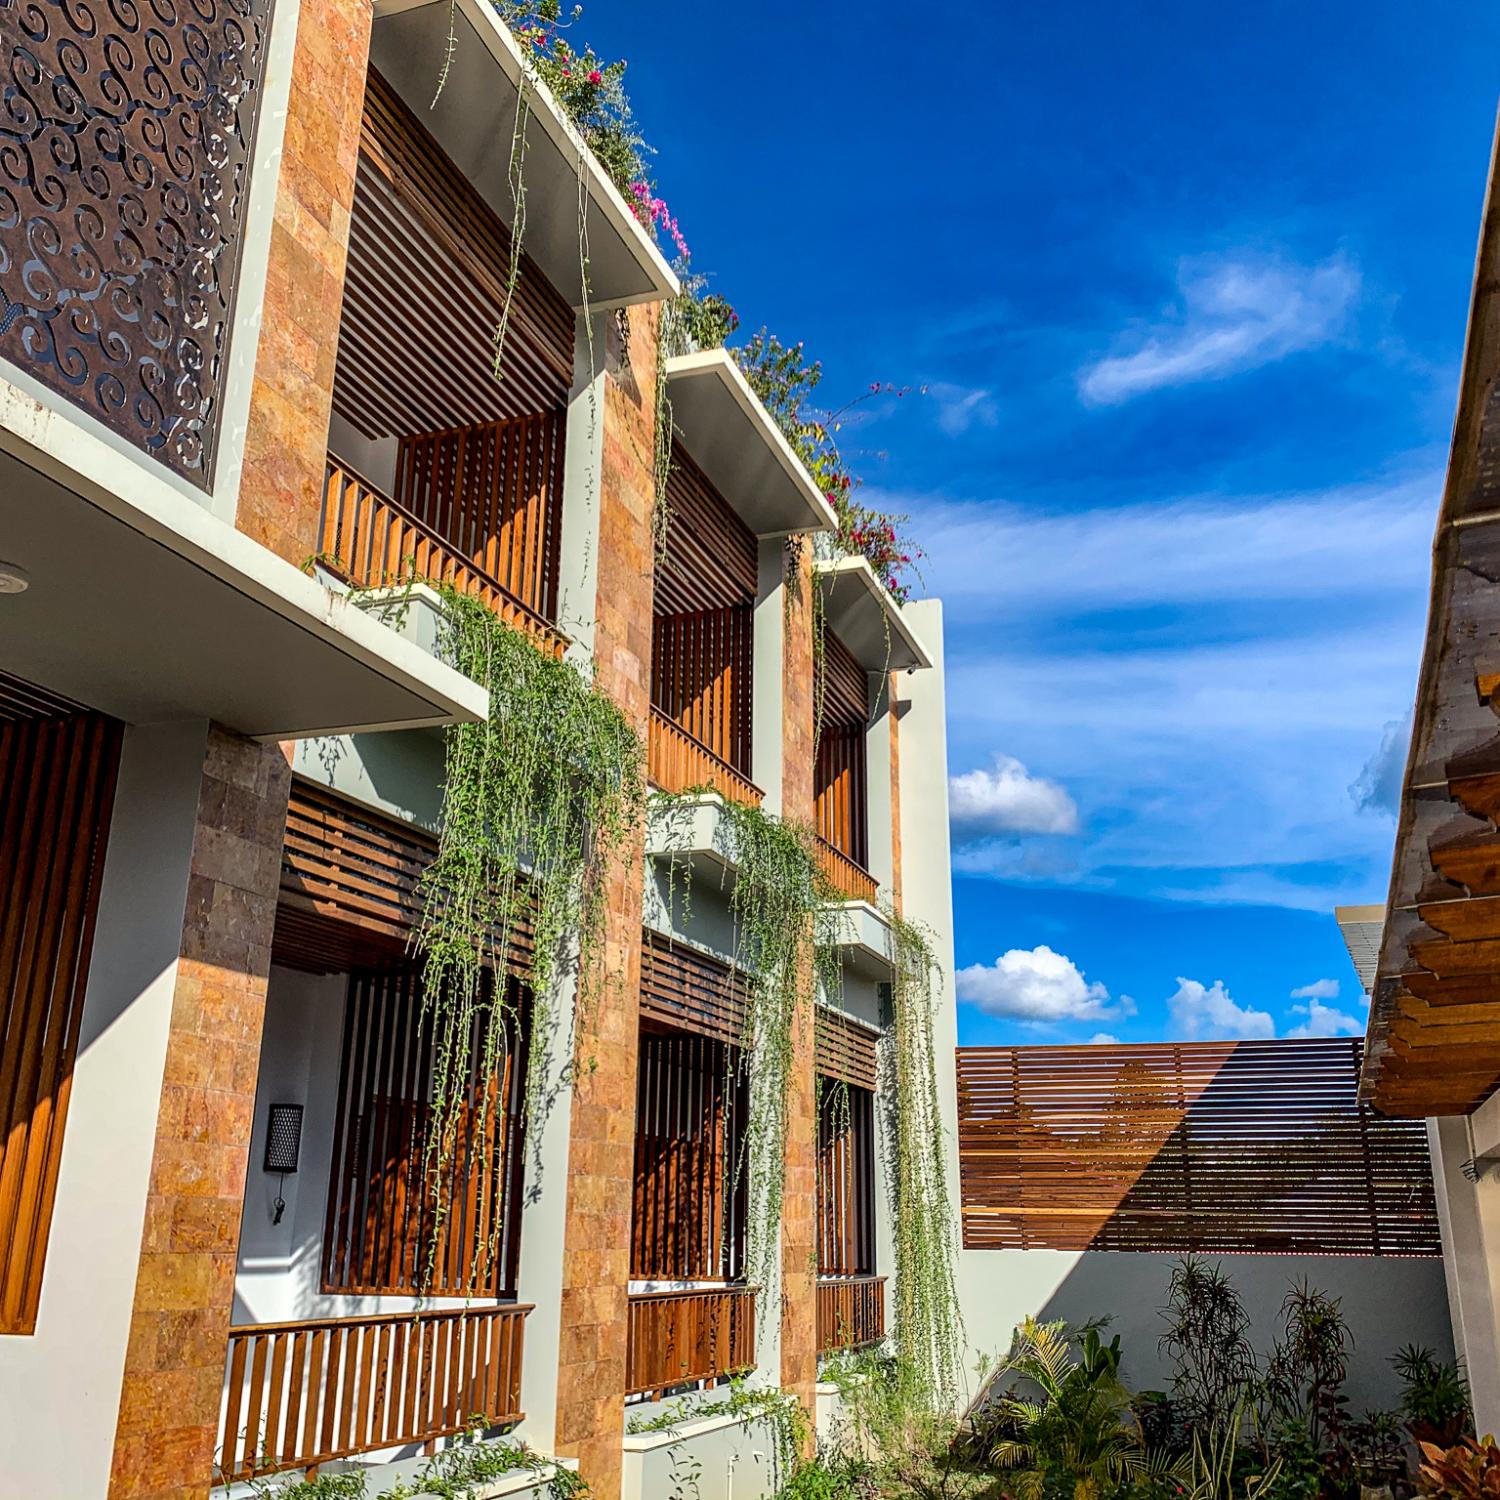 Exotic Indonesia. Stay in Tana Toraja’s best boutique hotel.